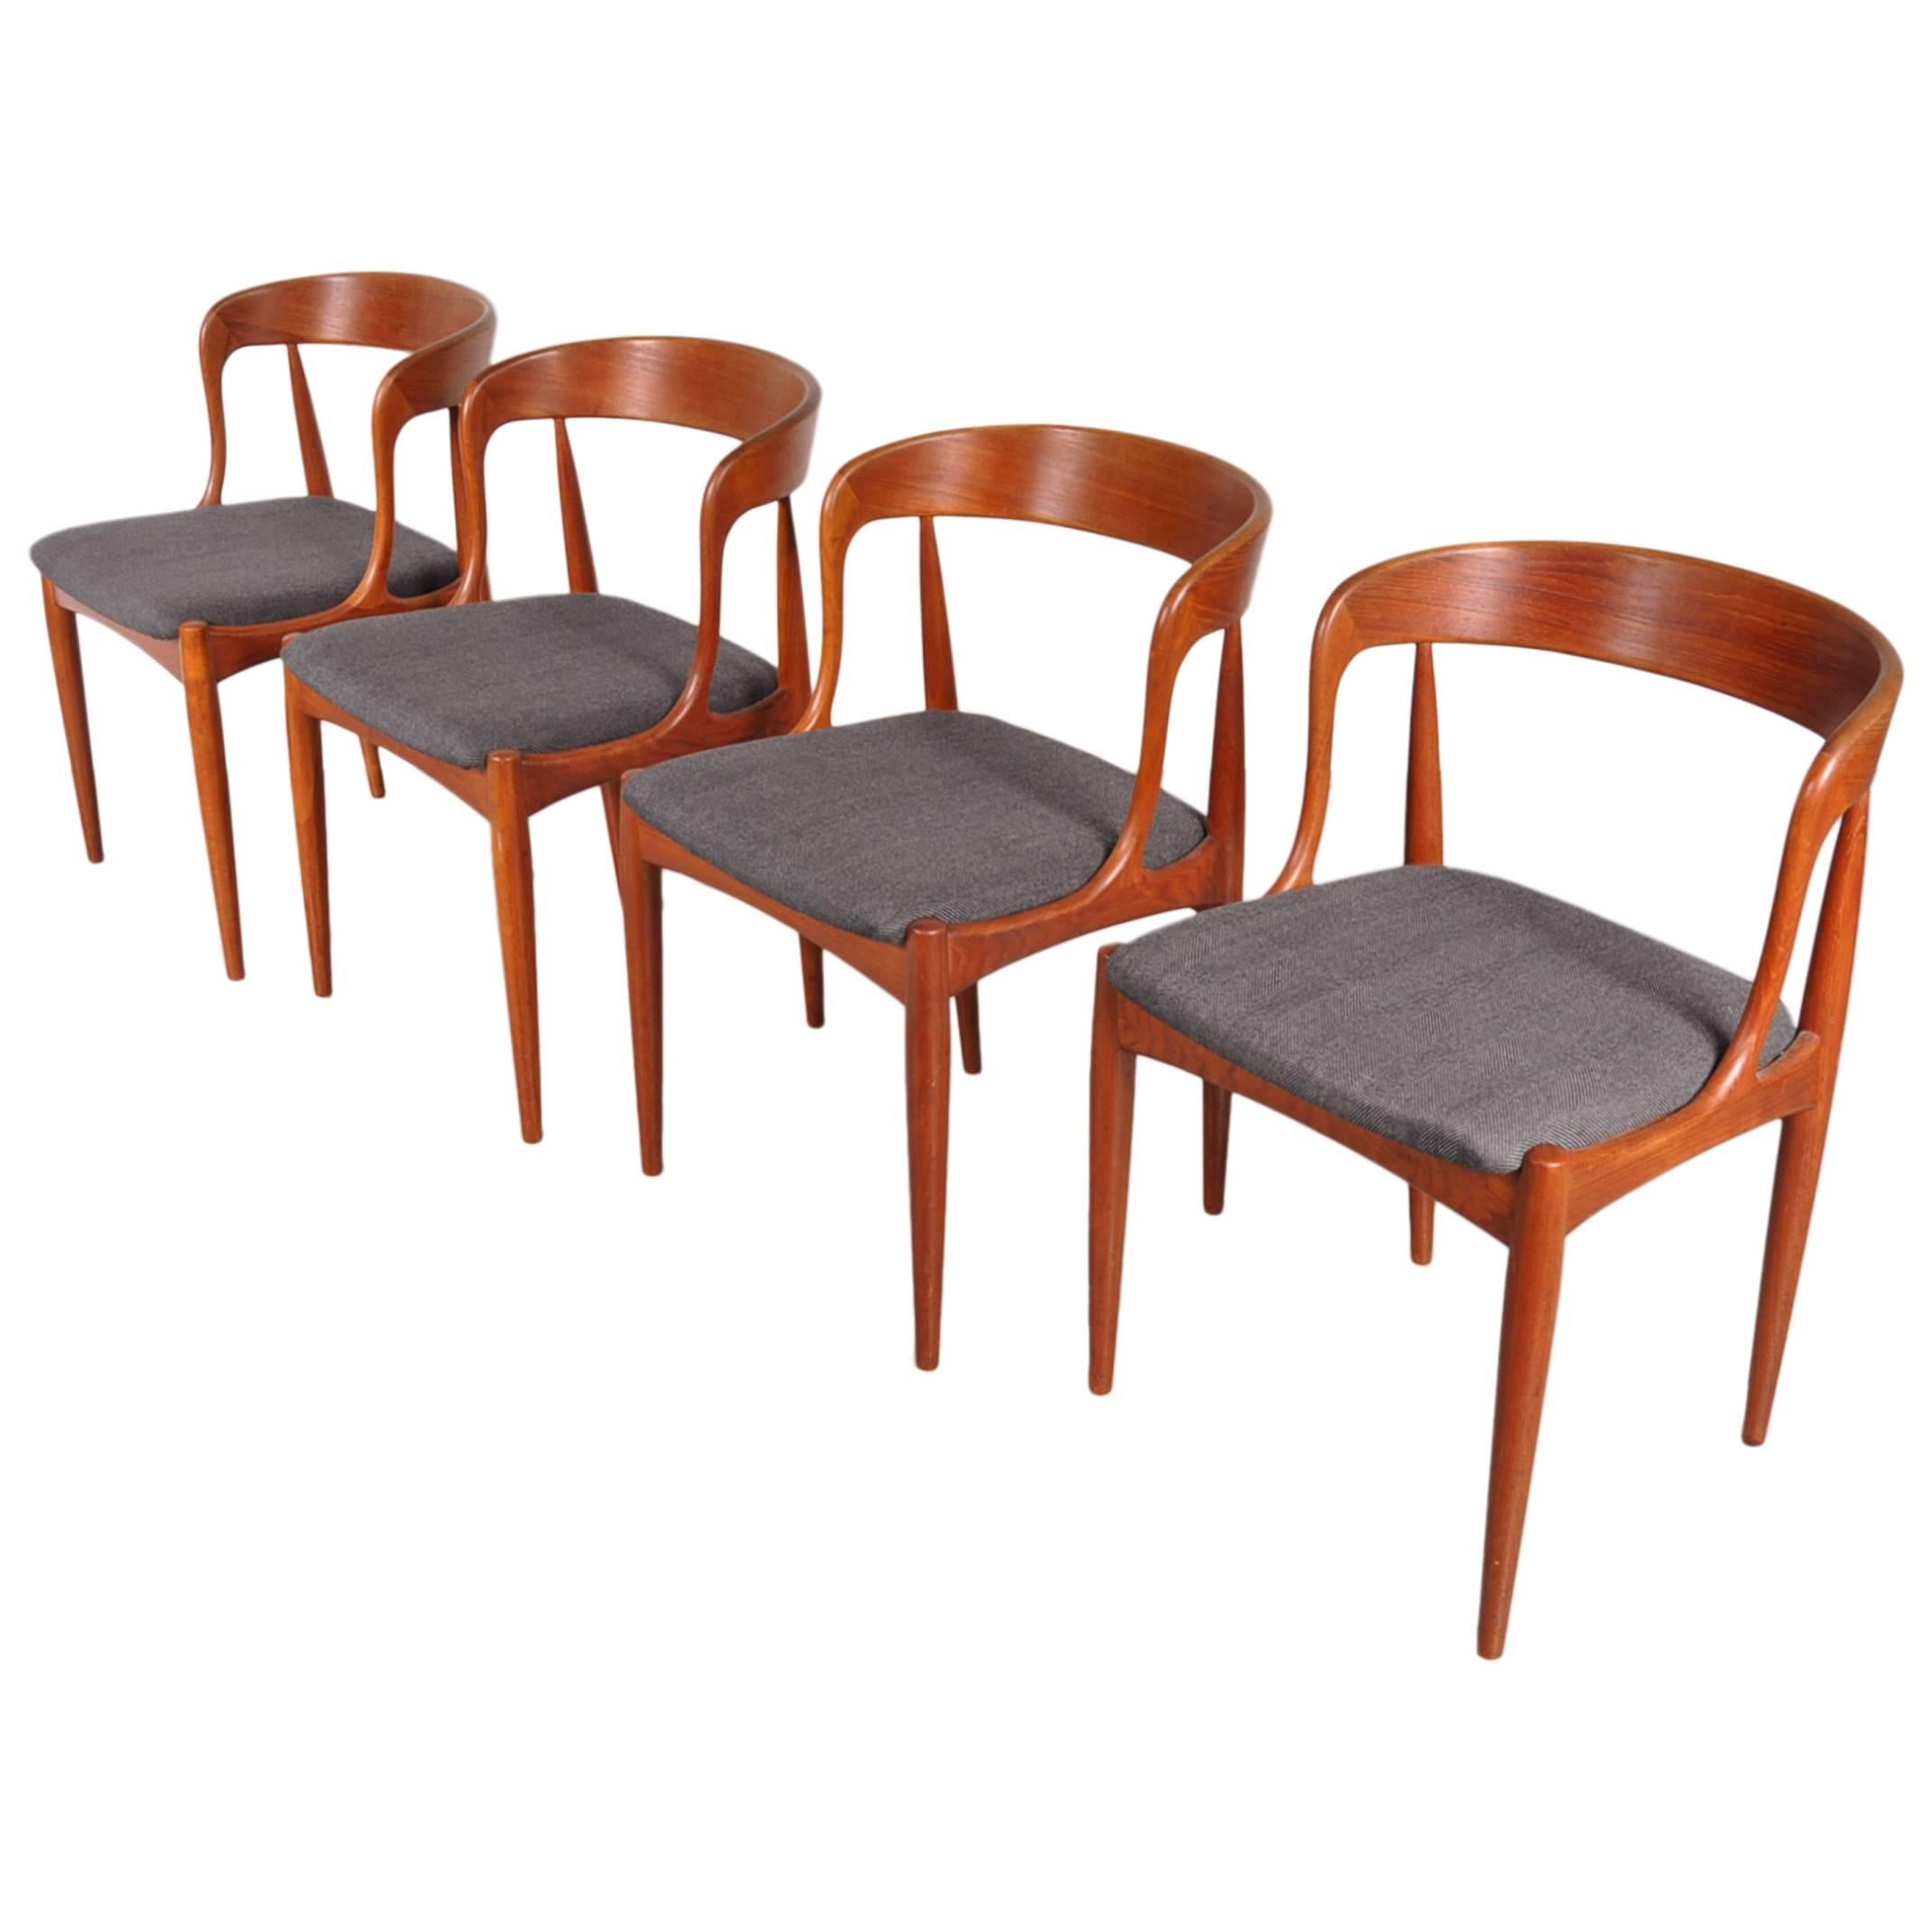 Set of Four Dining Chairs by Johannes Andersen, Denmark, circa 1950